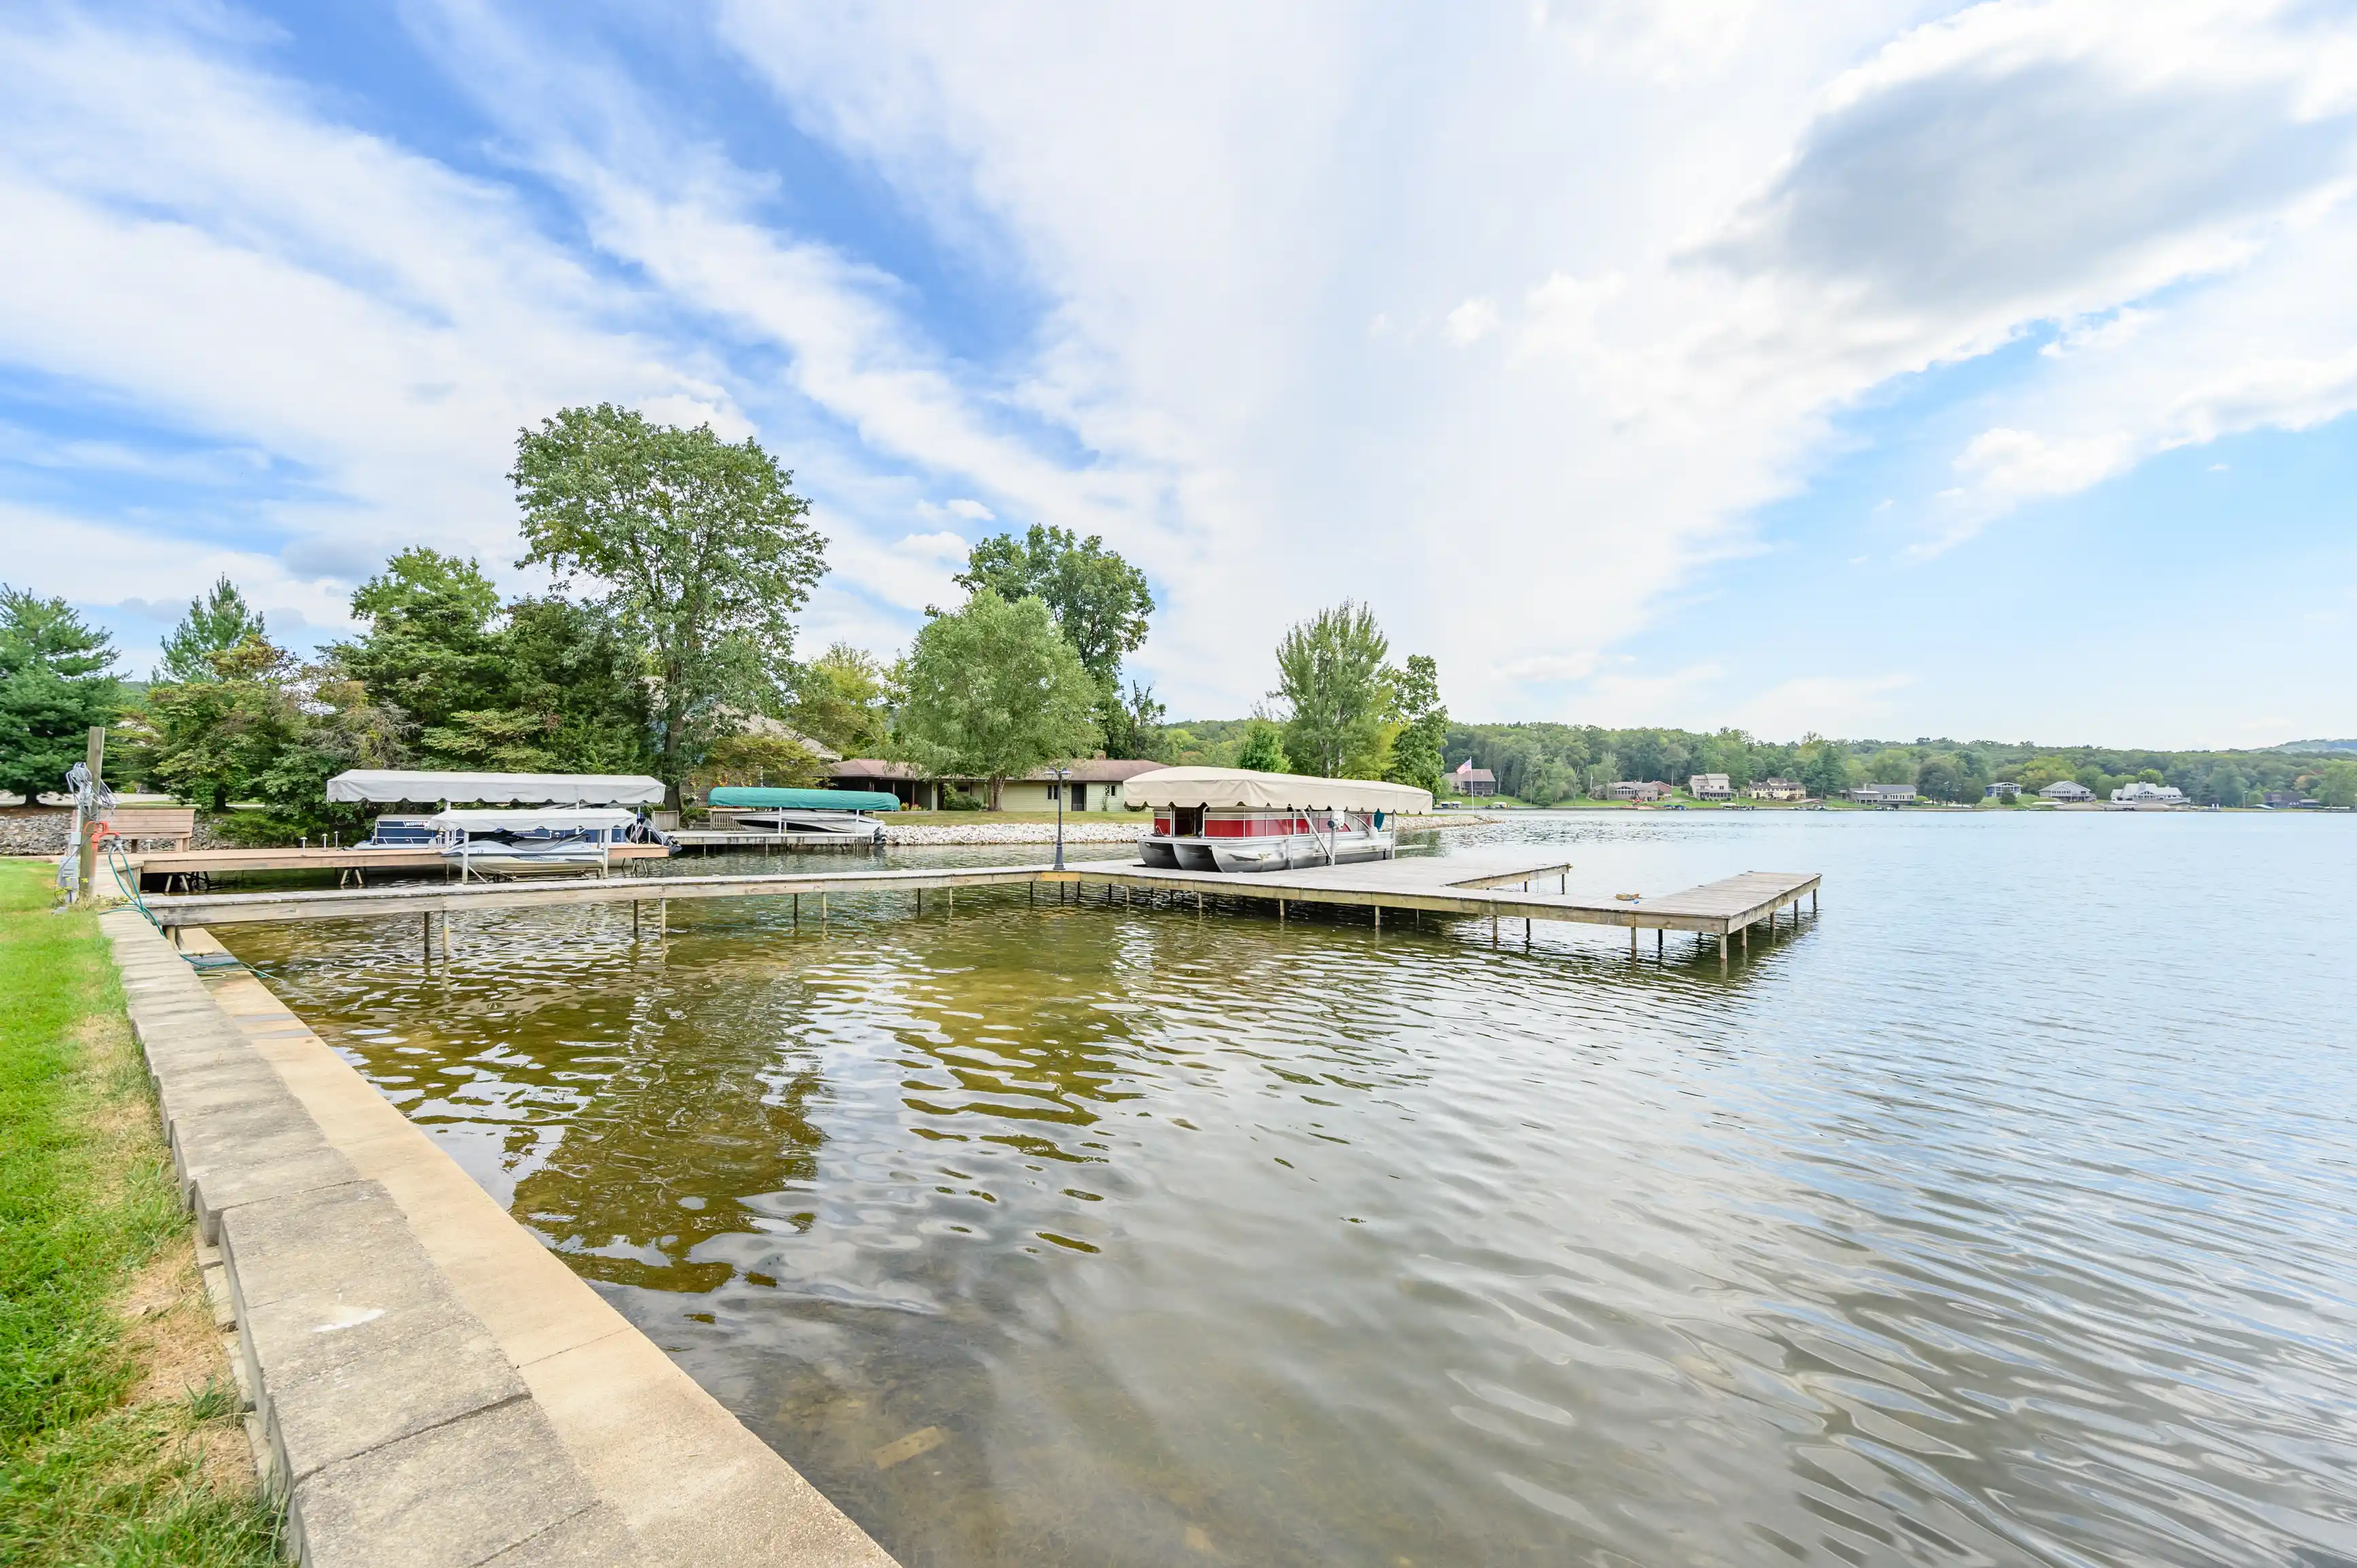 Scenic view of a calm lake with a dock, boats covered with tarps, and surrounding greenery on a clear day.